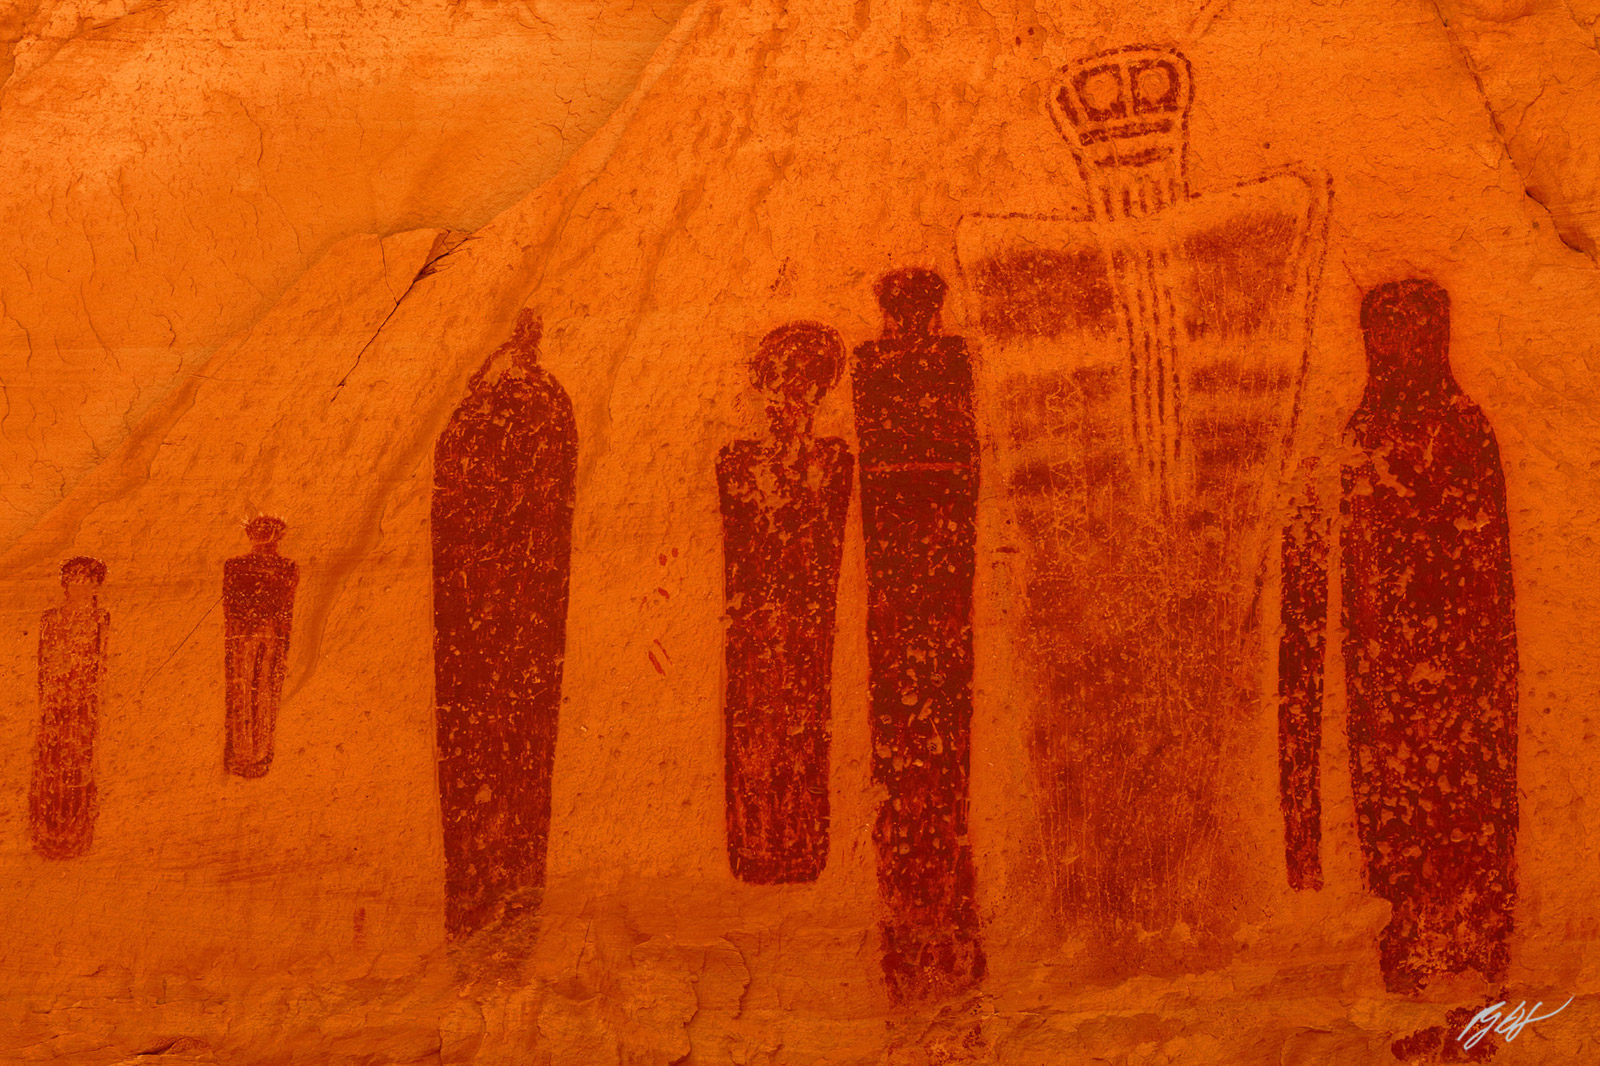 The Great Ghost Petroglyphs in the Great Gallery in Horseshoe Canyon in Canyonlands National Park in Utah